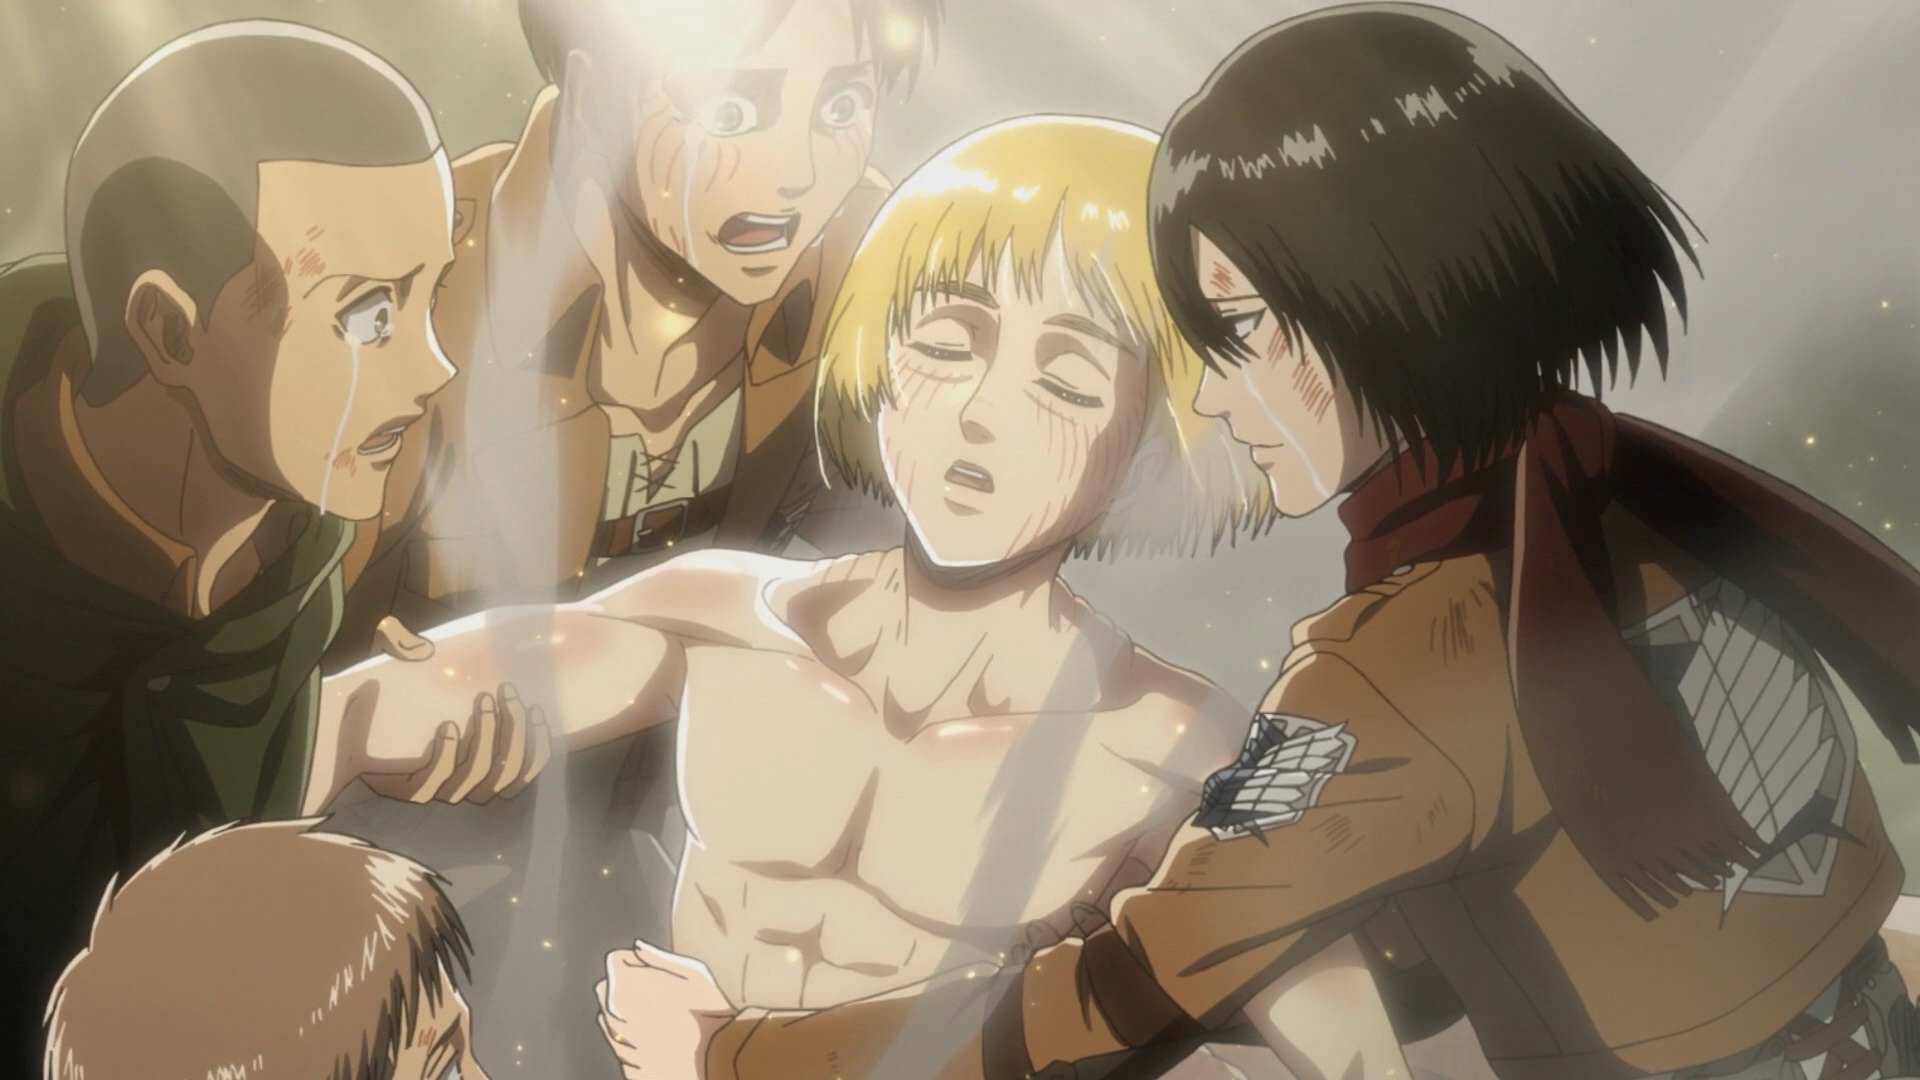 Armin transforms from Titan back to human